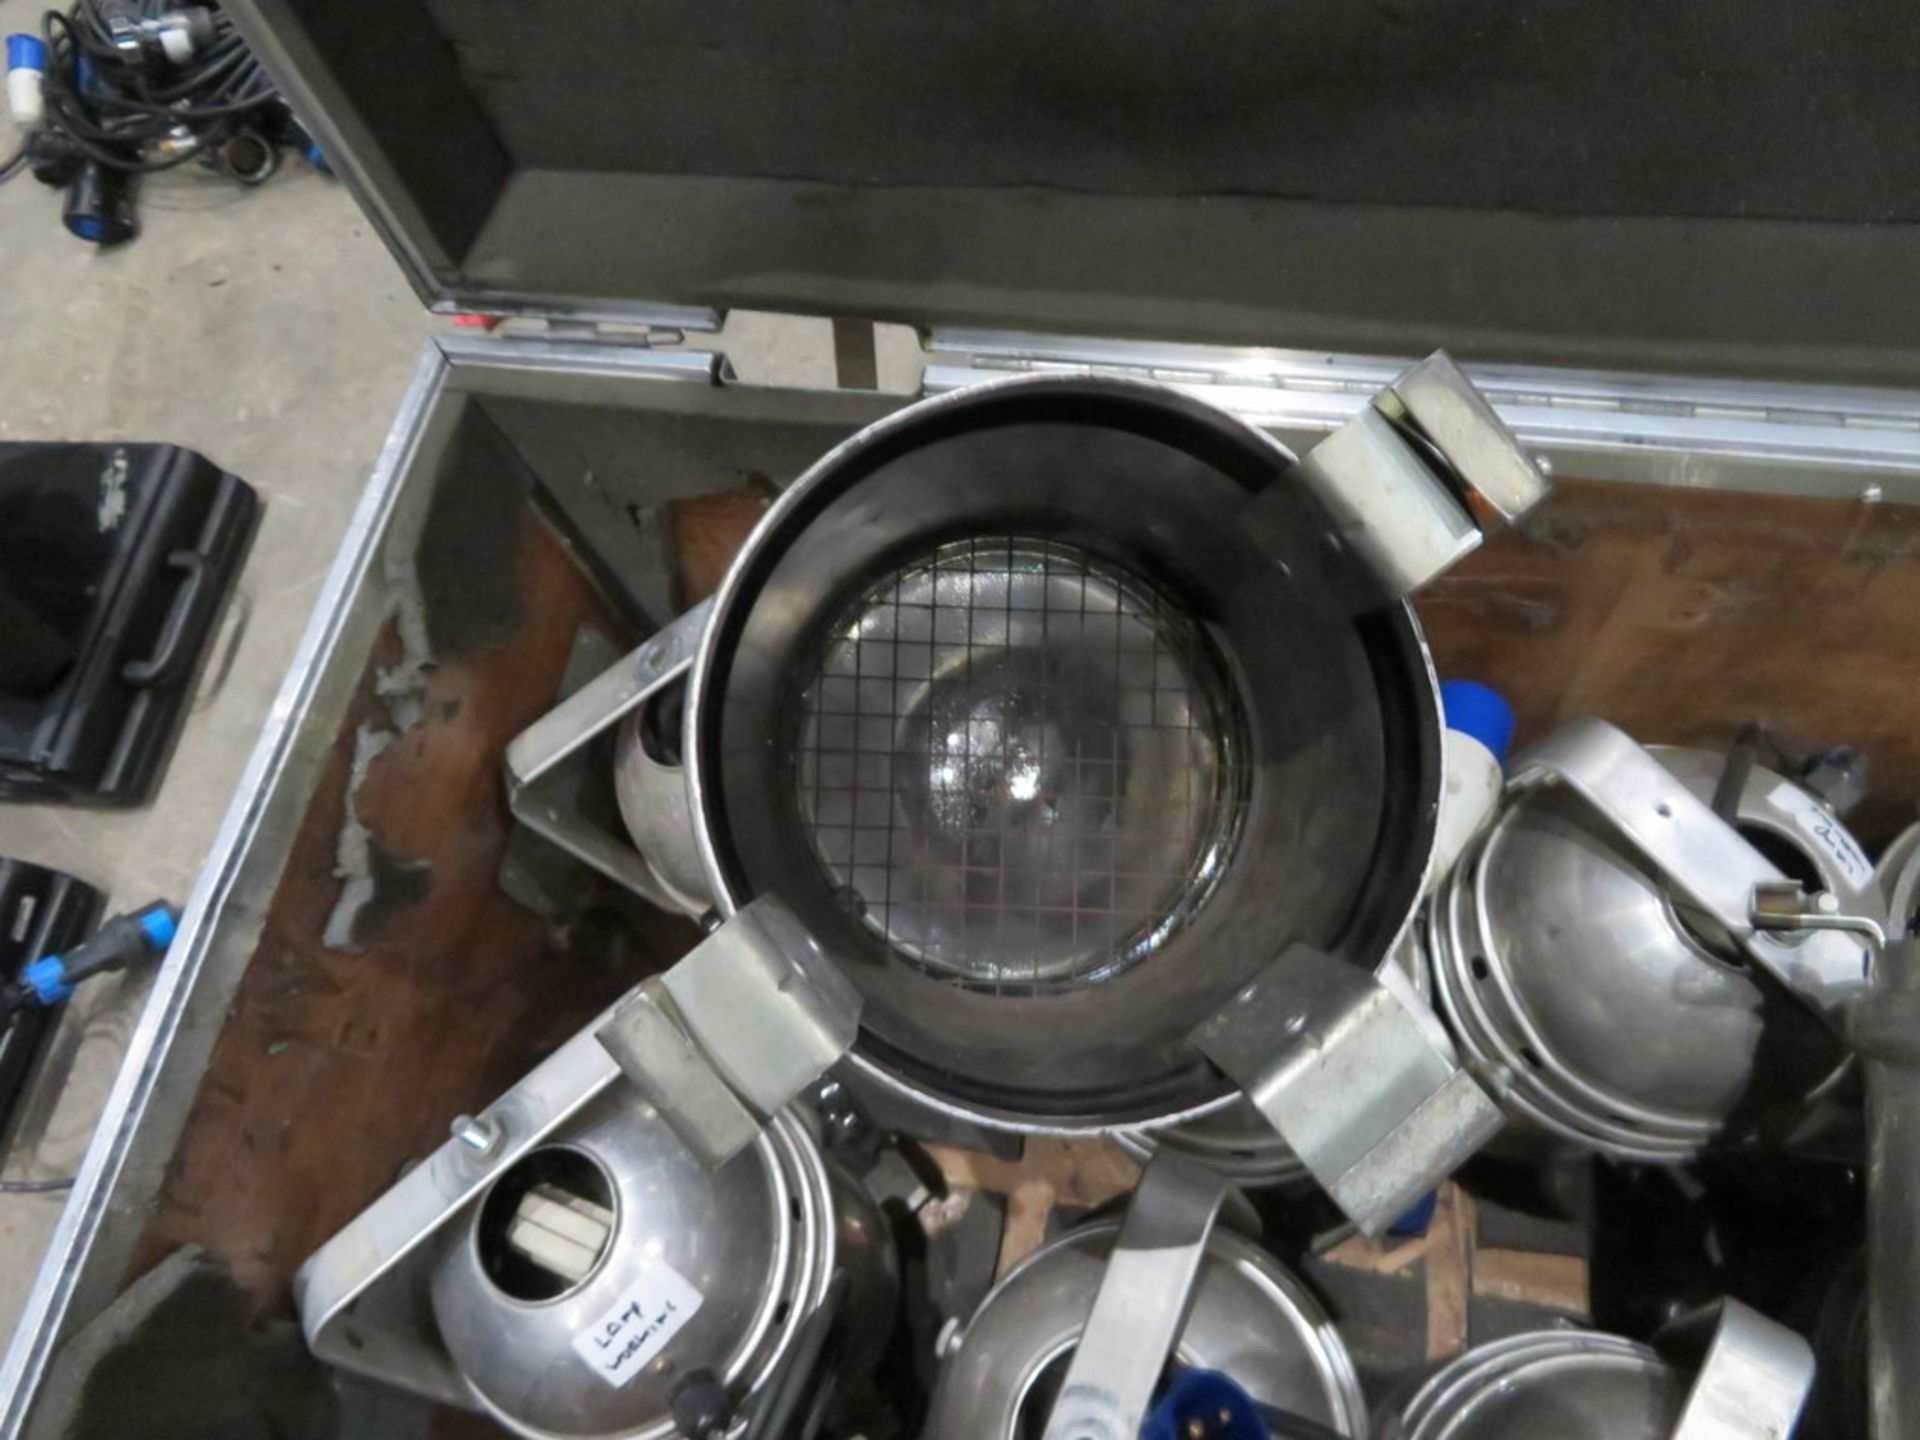 Flight case with 12 silver par cans - Image 3 of 4